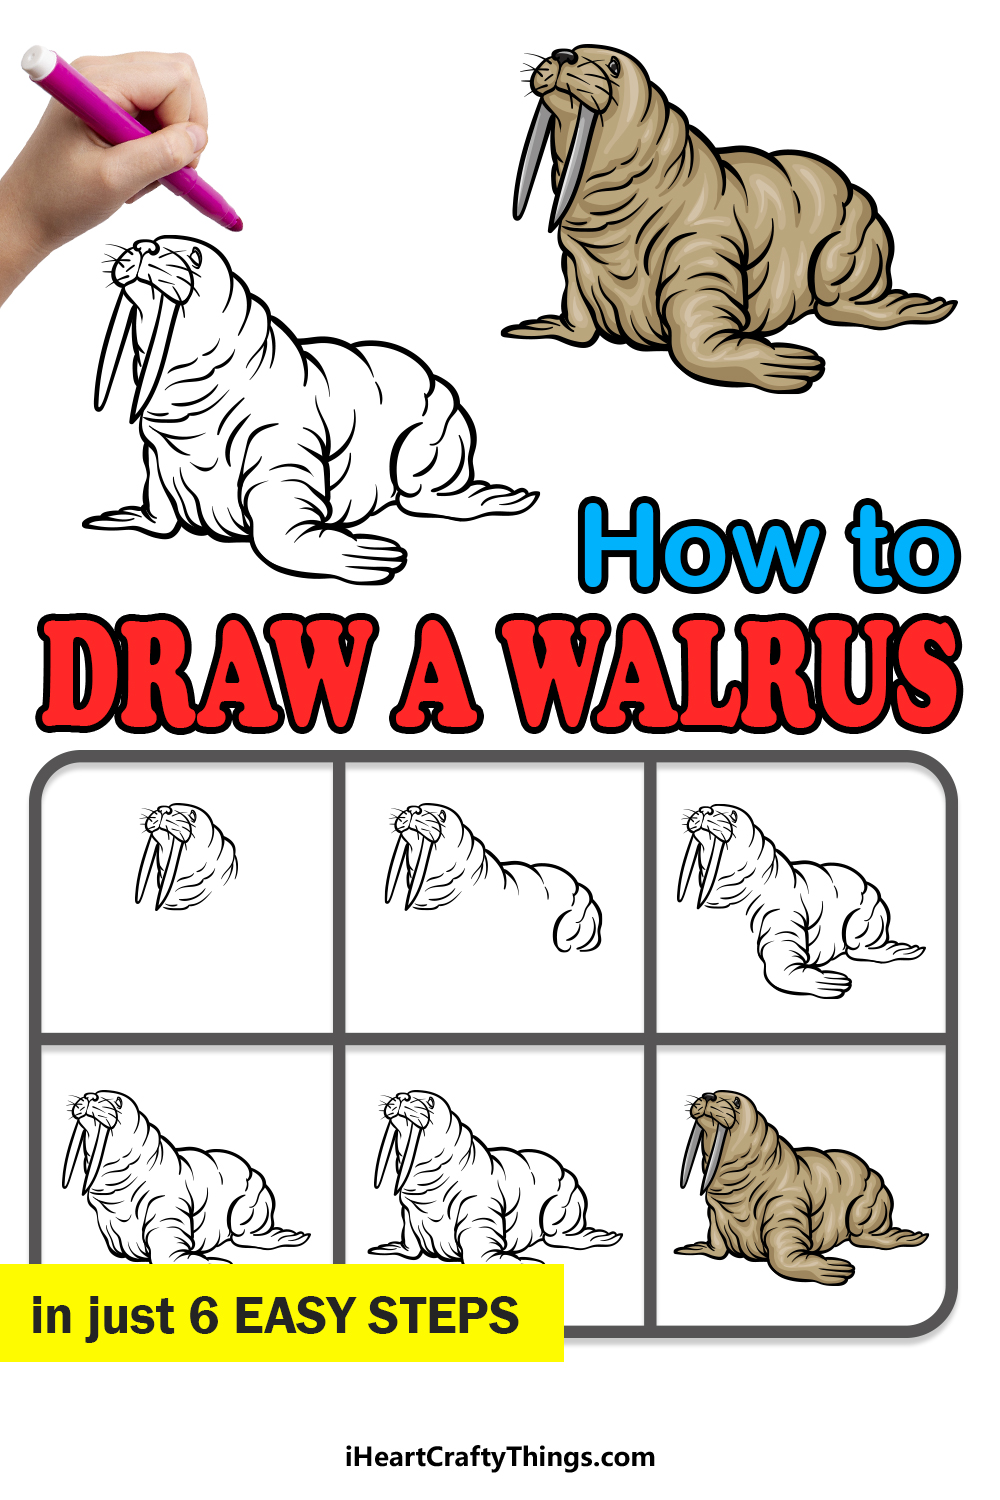 how to draw a Walrus in 6 easy steps